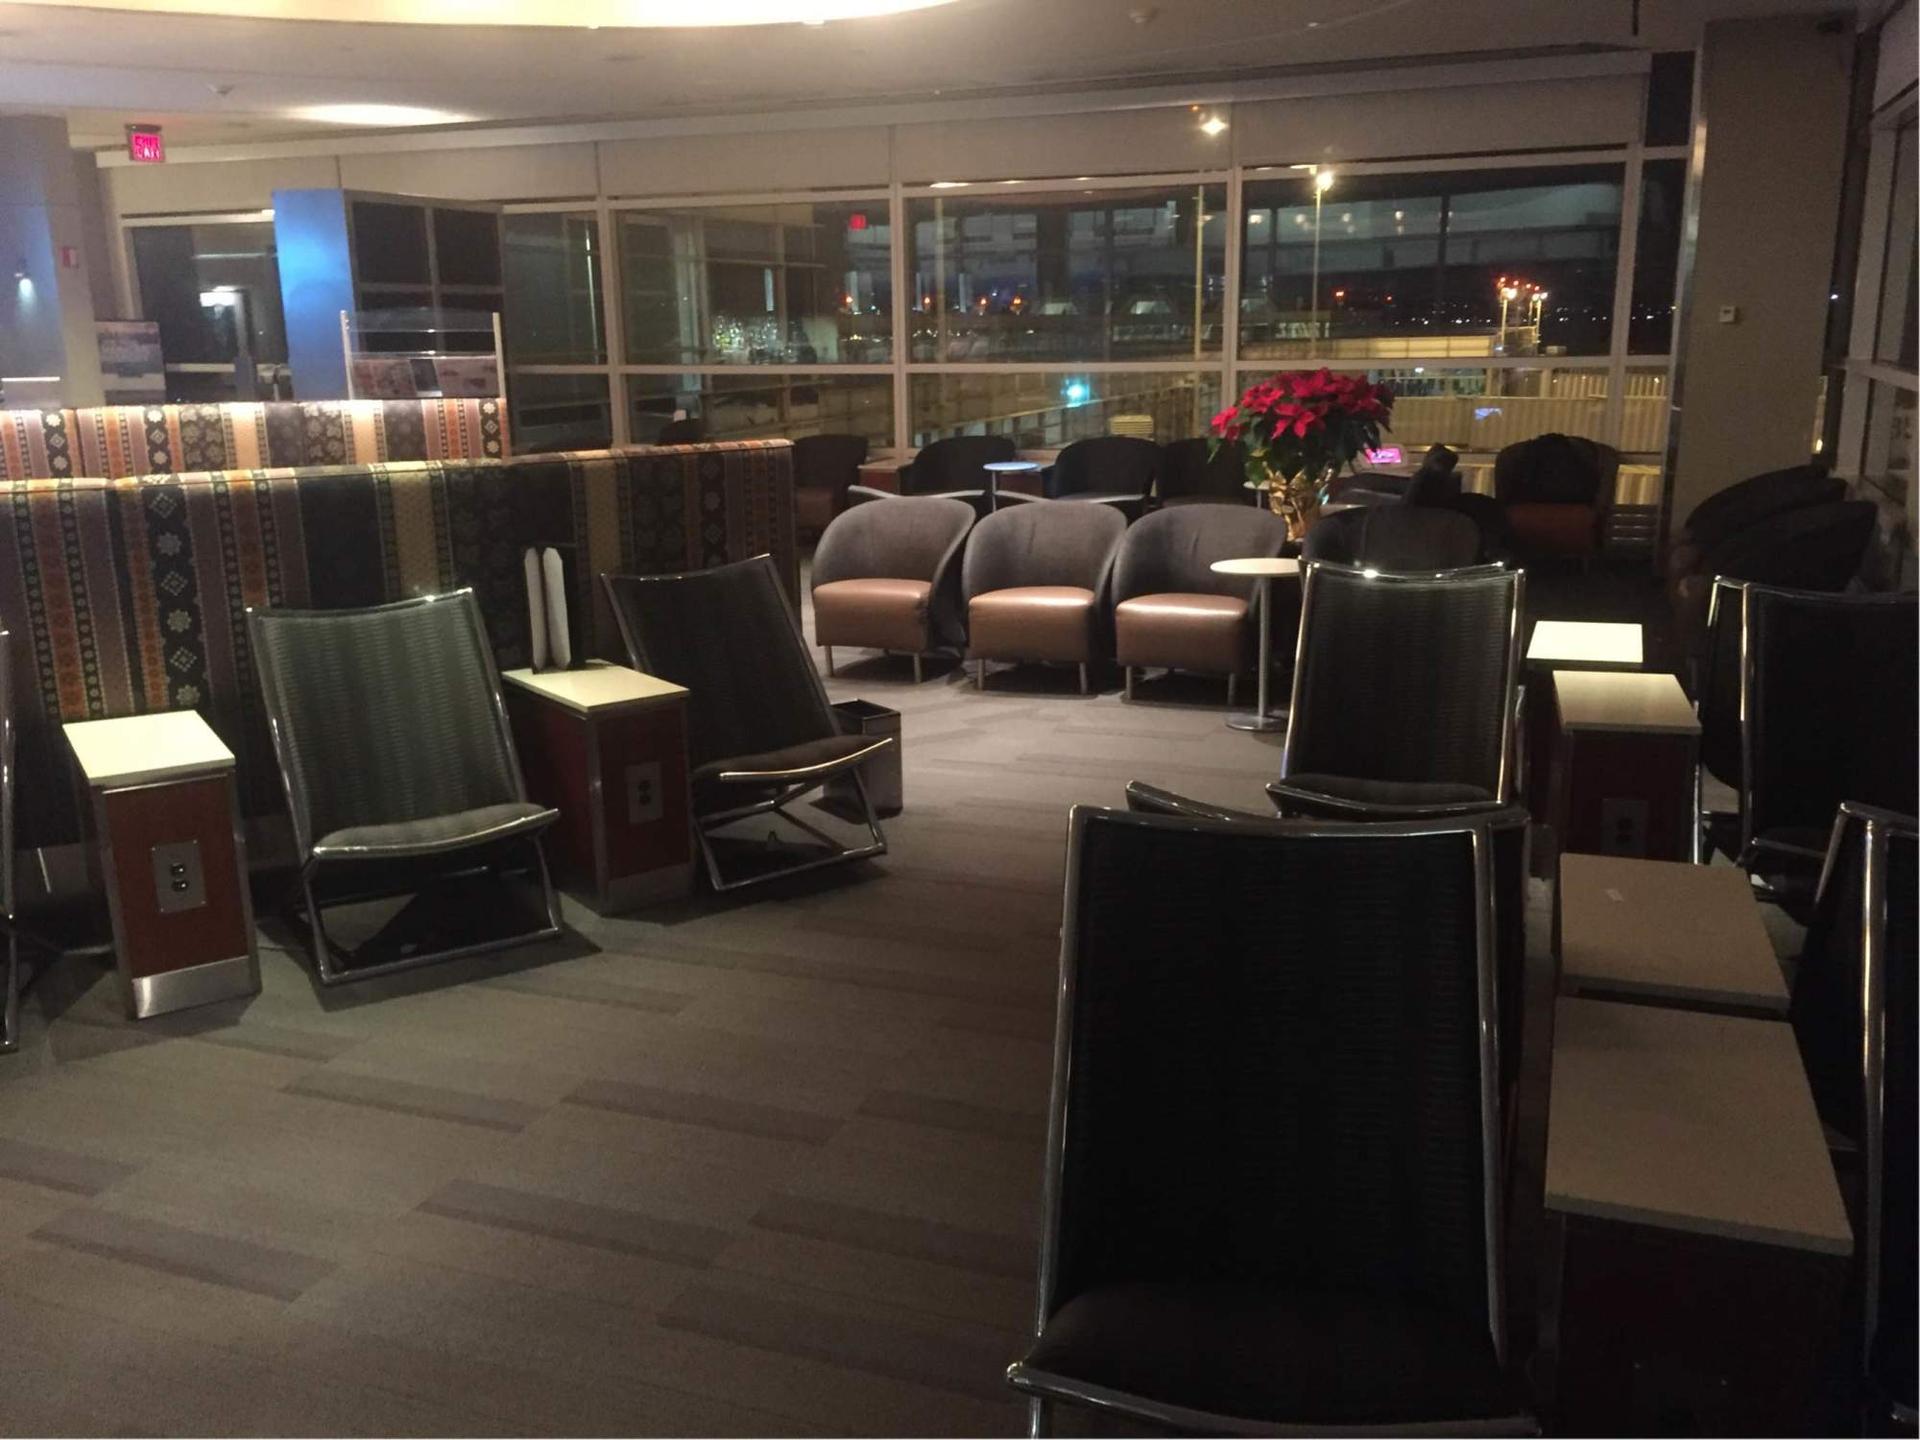 American Airlines Admirals Club image 13 of 22